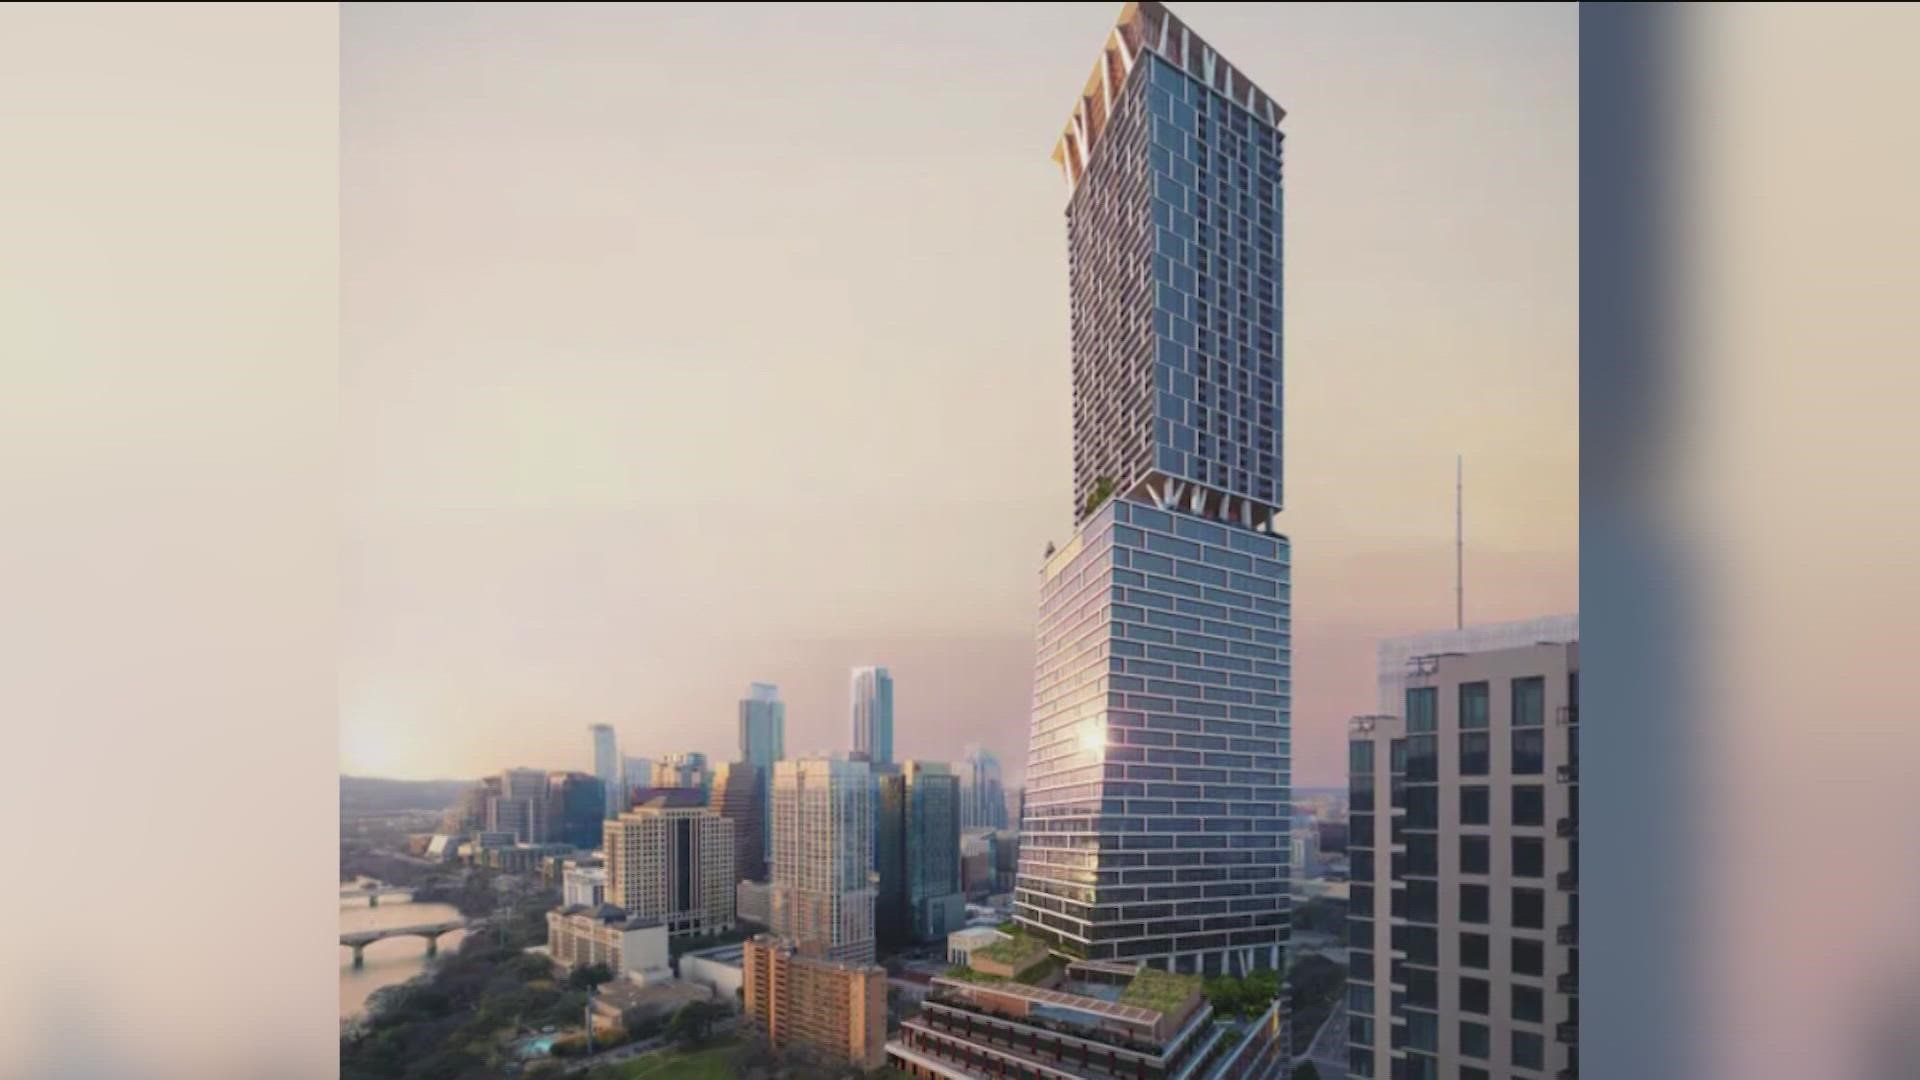 Developers have revealed the name of the building that is set to be the tallest building in Austin's skyline. It will also be the tallest in Texas.